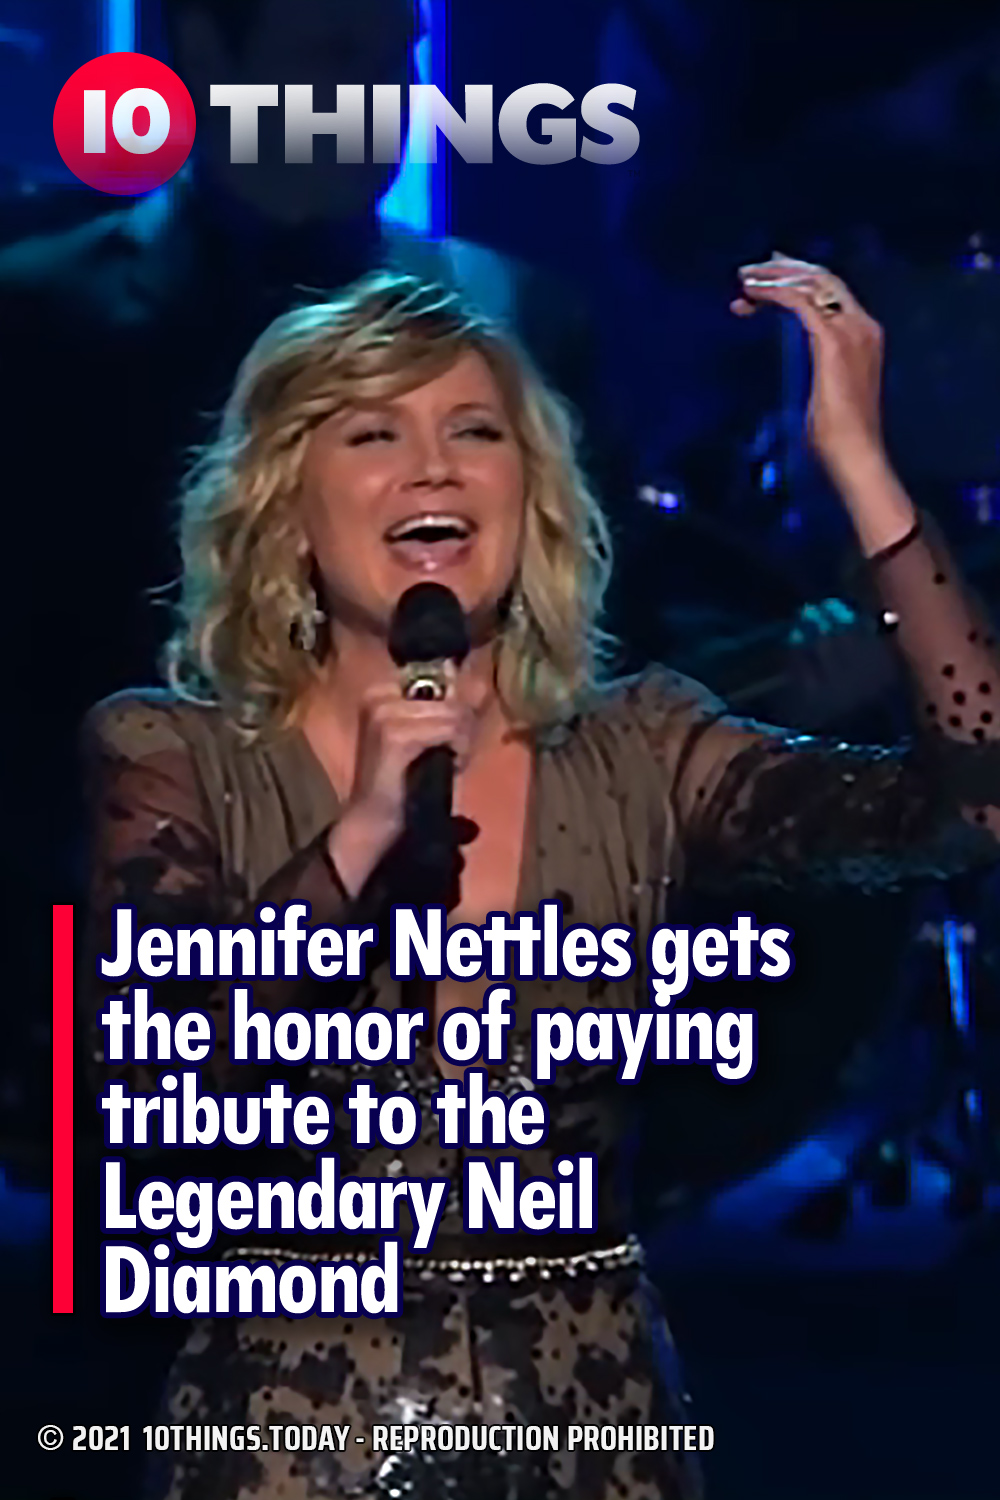 Jennifer Nettles gets the honor of paying tribute to the Legendary Neil Diamond